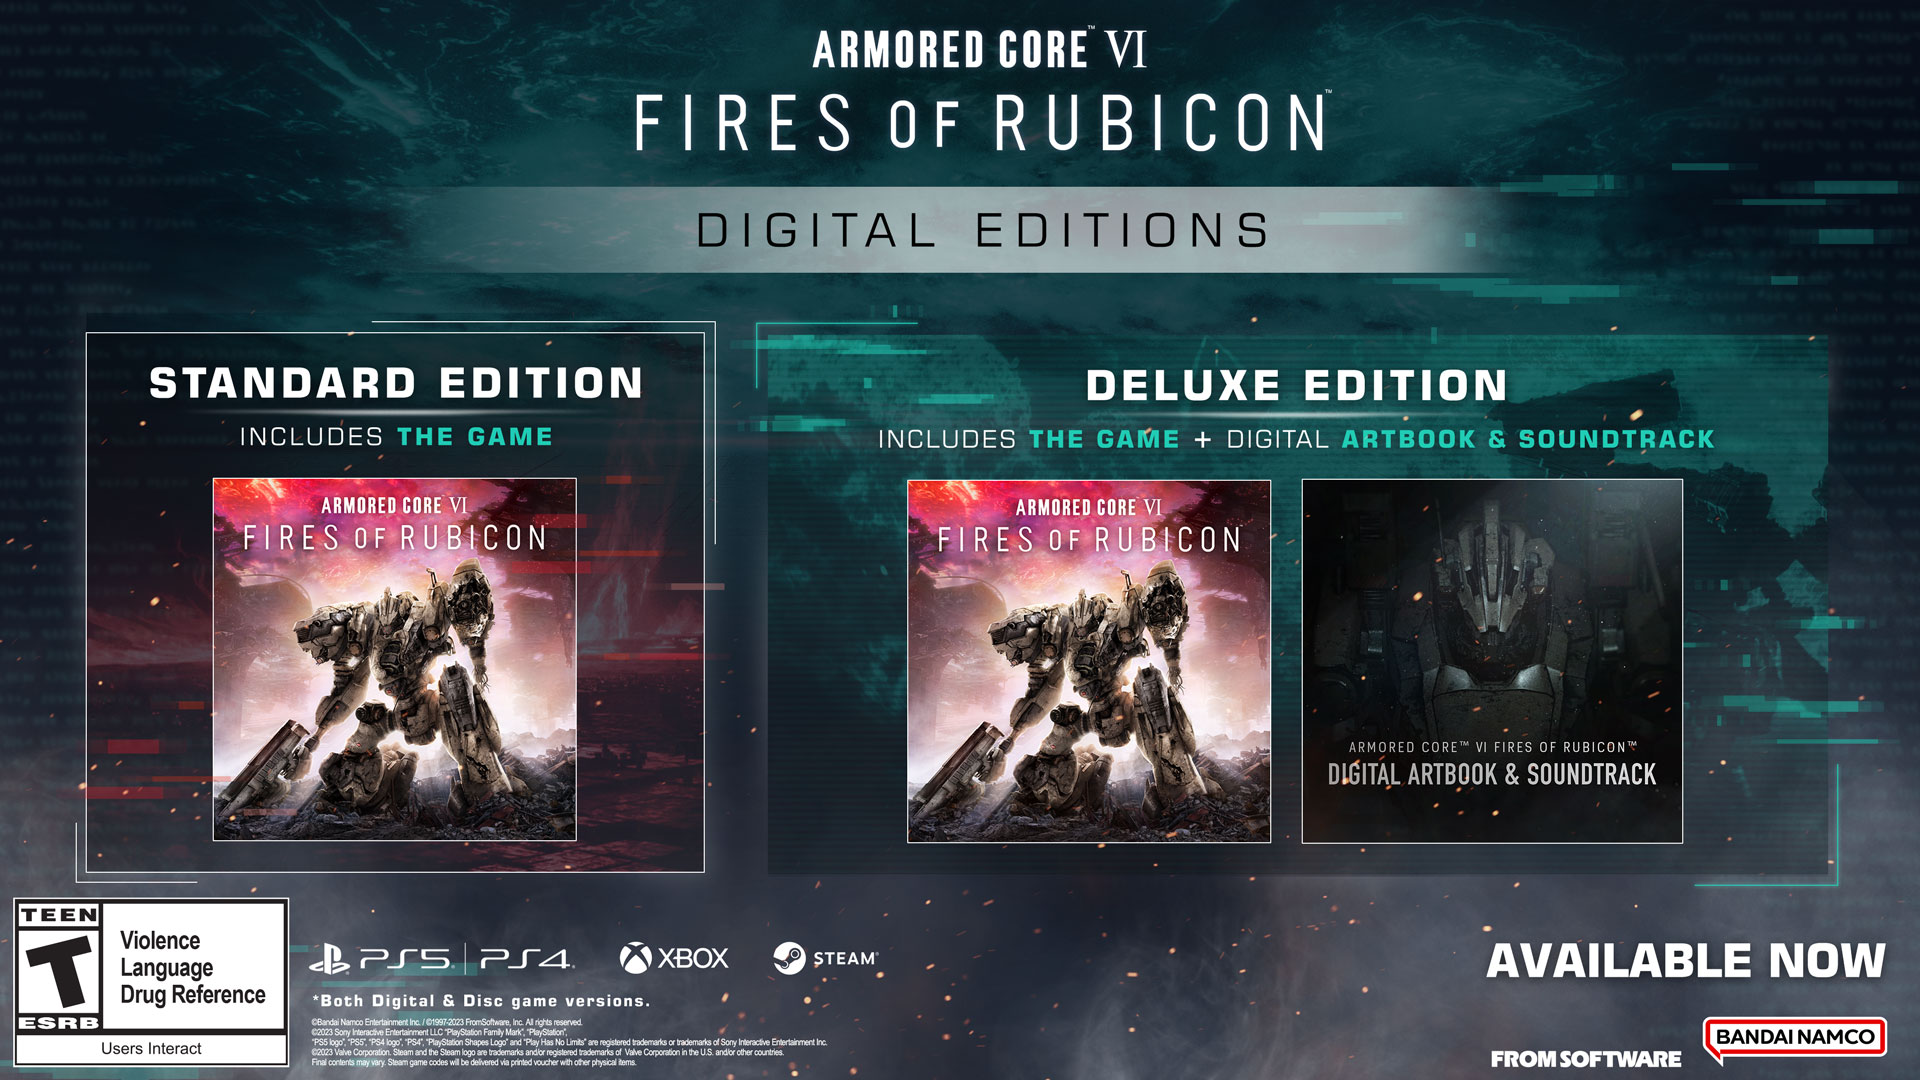 Armored Core VI: Fires of Rubicon Launch Edition PS5